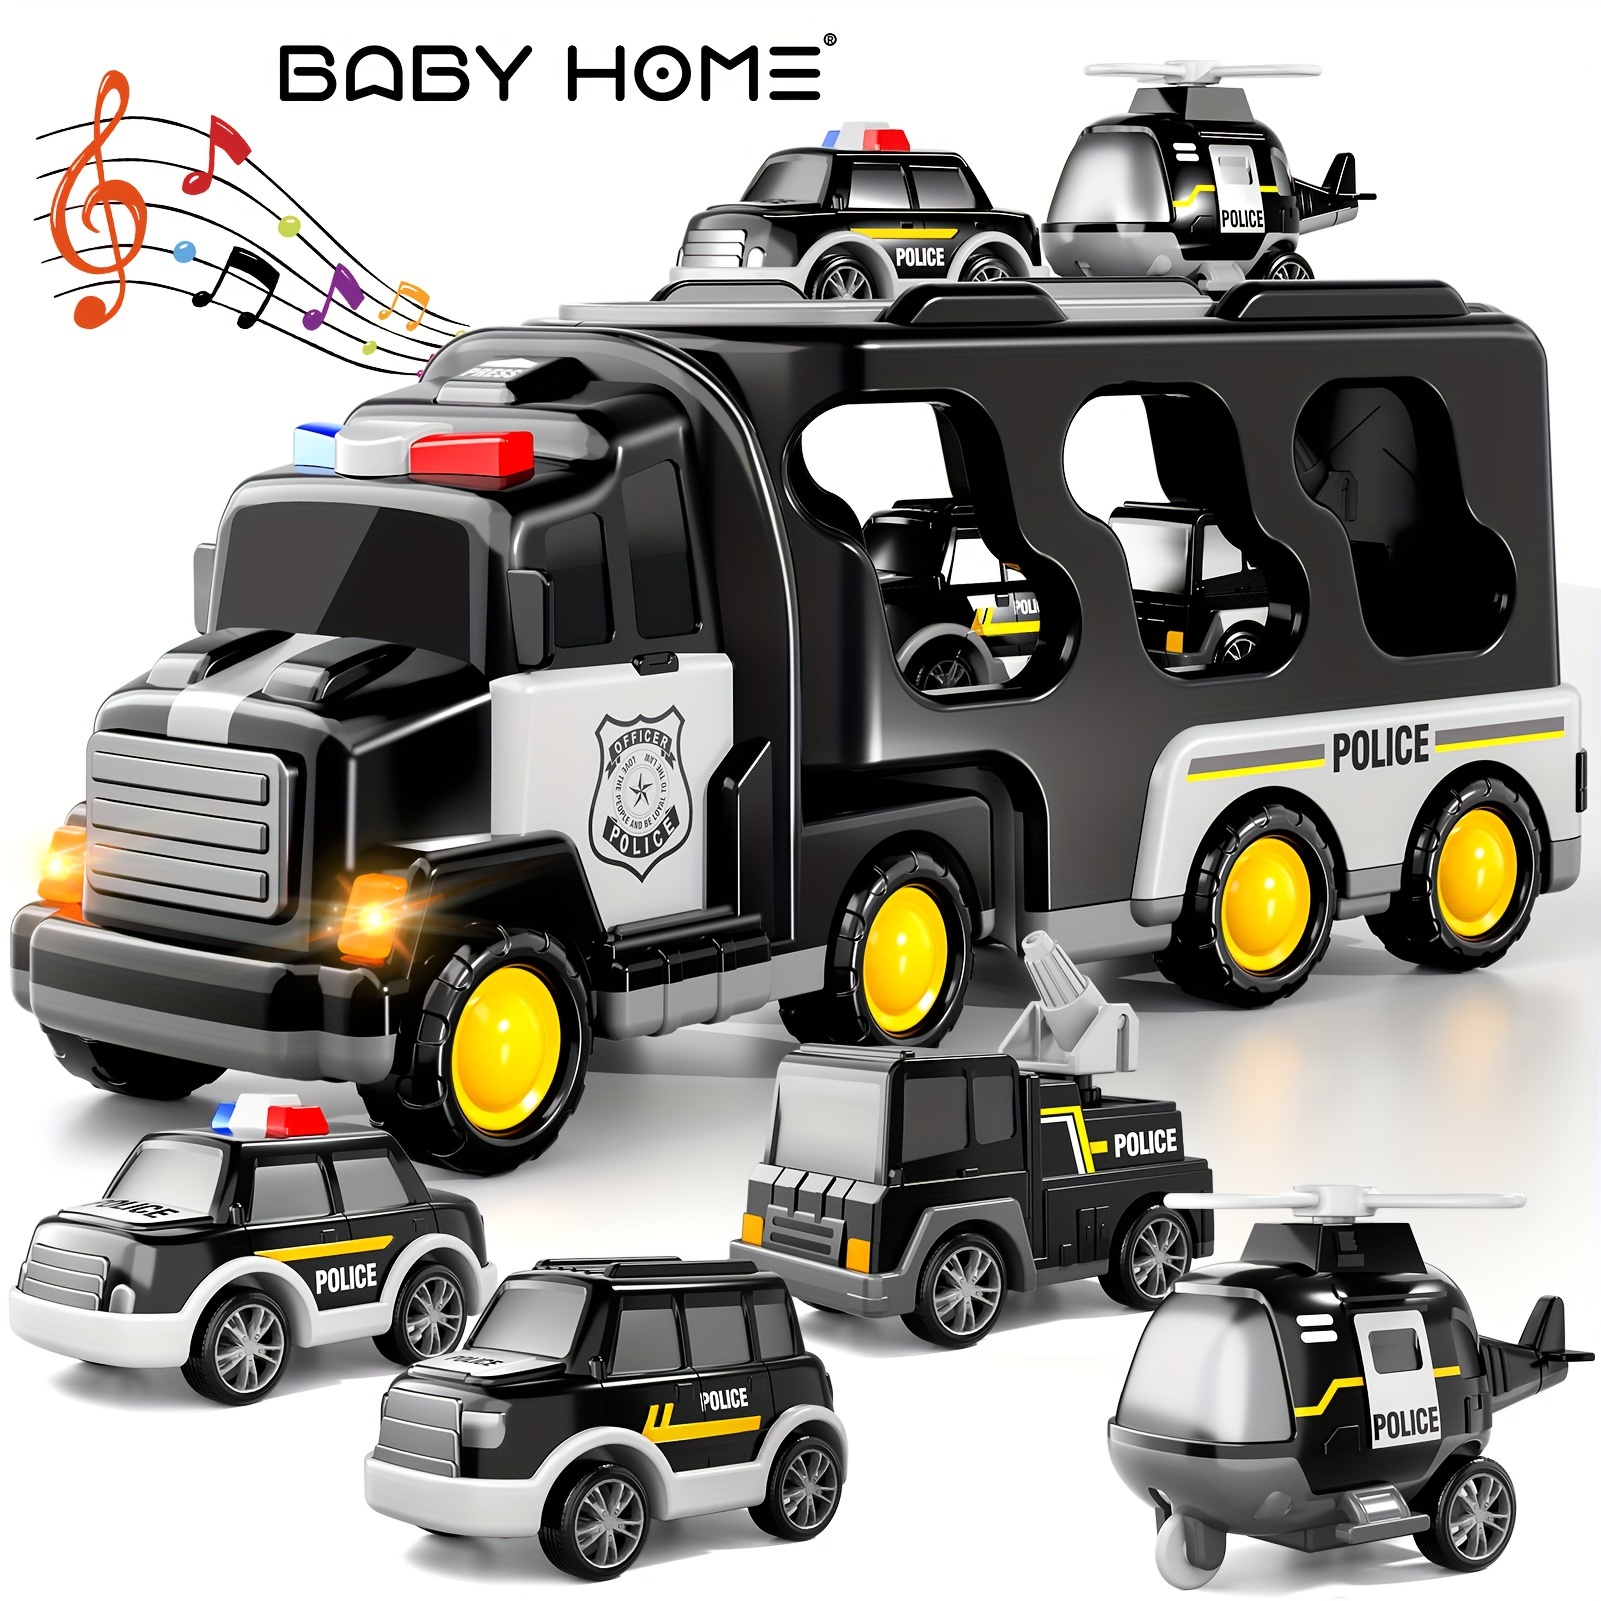 

Babyhome Police Truck Toys, 5 In 1 Truck Friction Power Toy Car, Christmas Birthday Gifts, Accessories Color Random